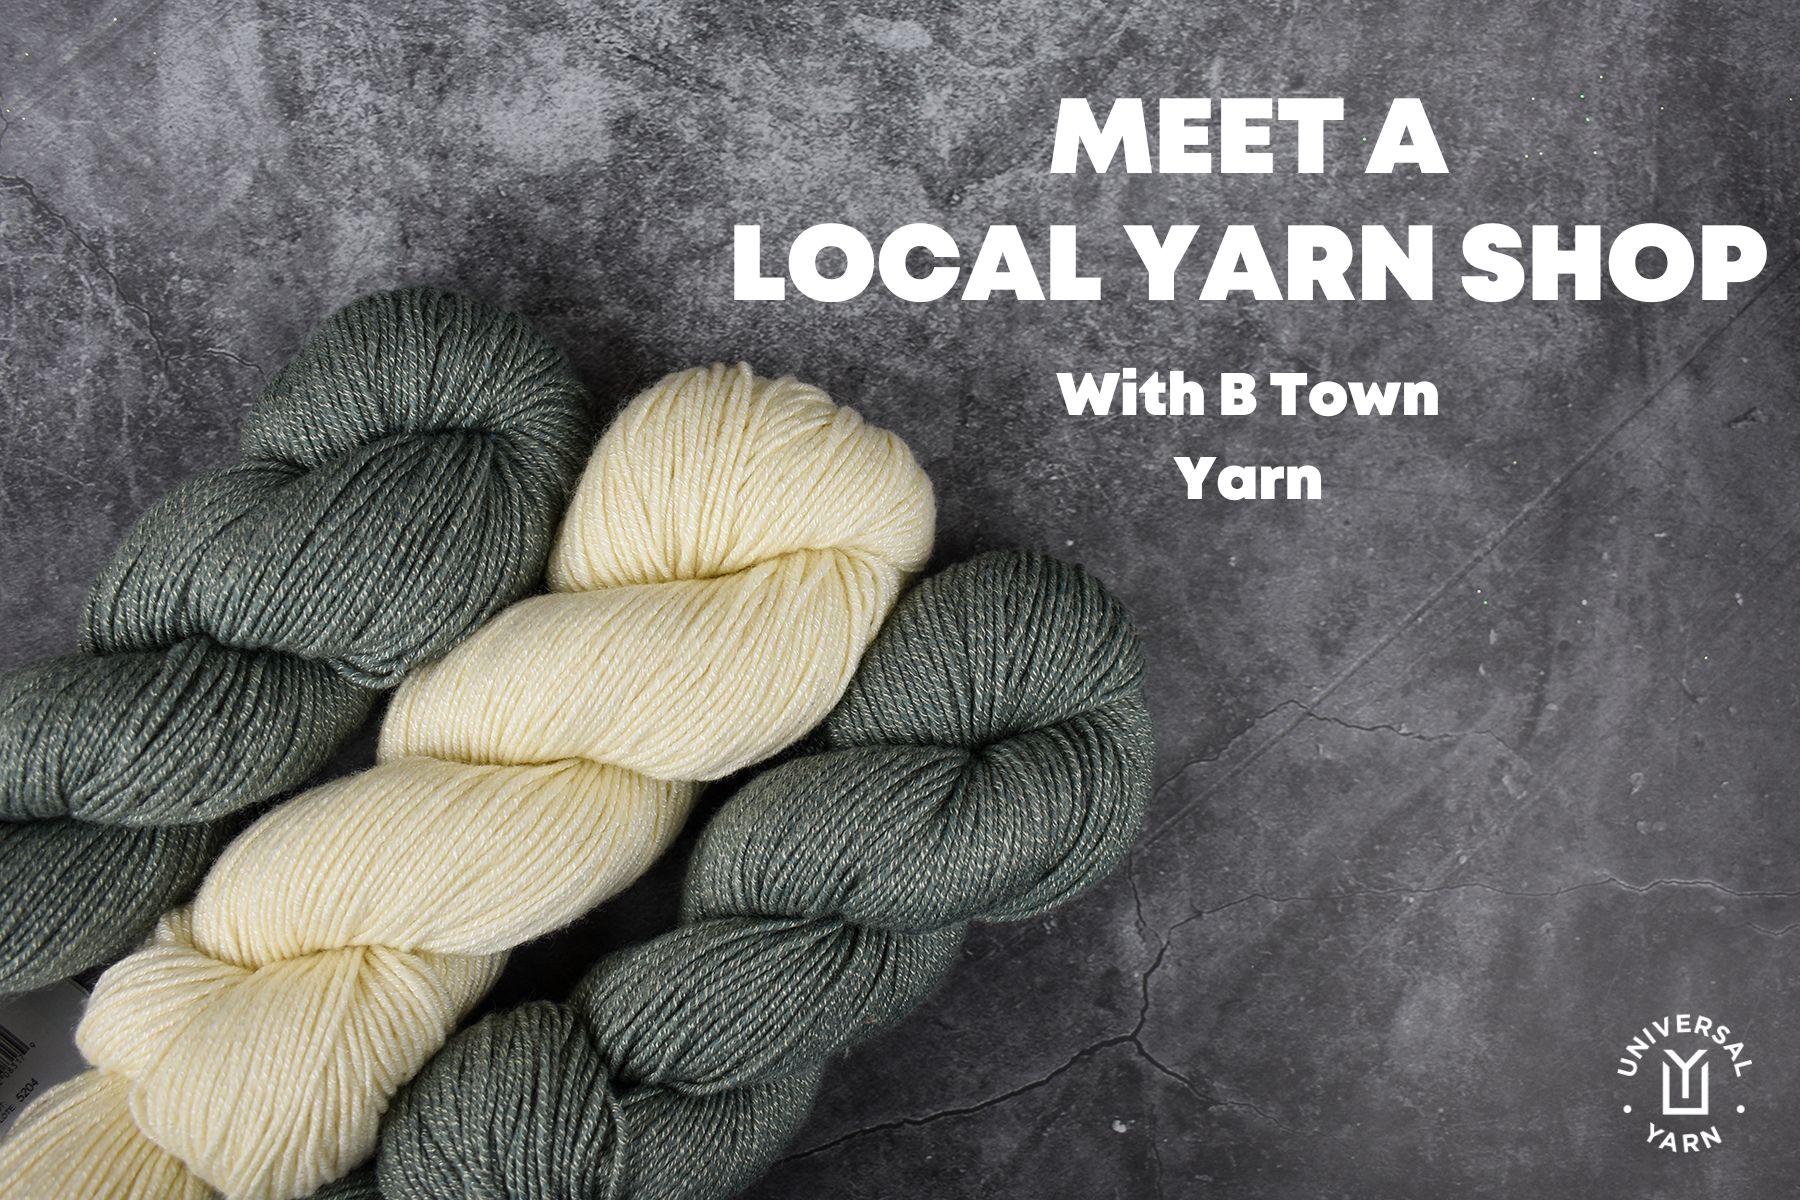 Meet a Local Yarn Shop with B Town yarn - three hanks of Wool Pop on the left side of the screen with a black marble background